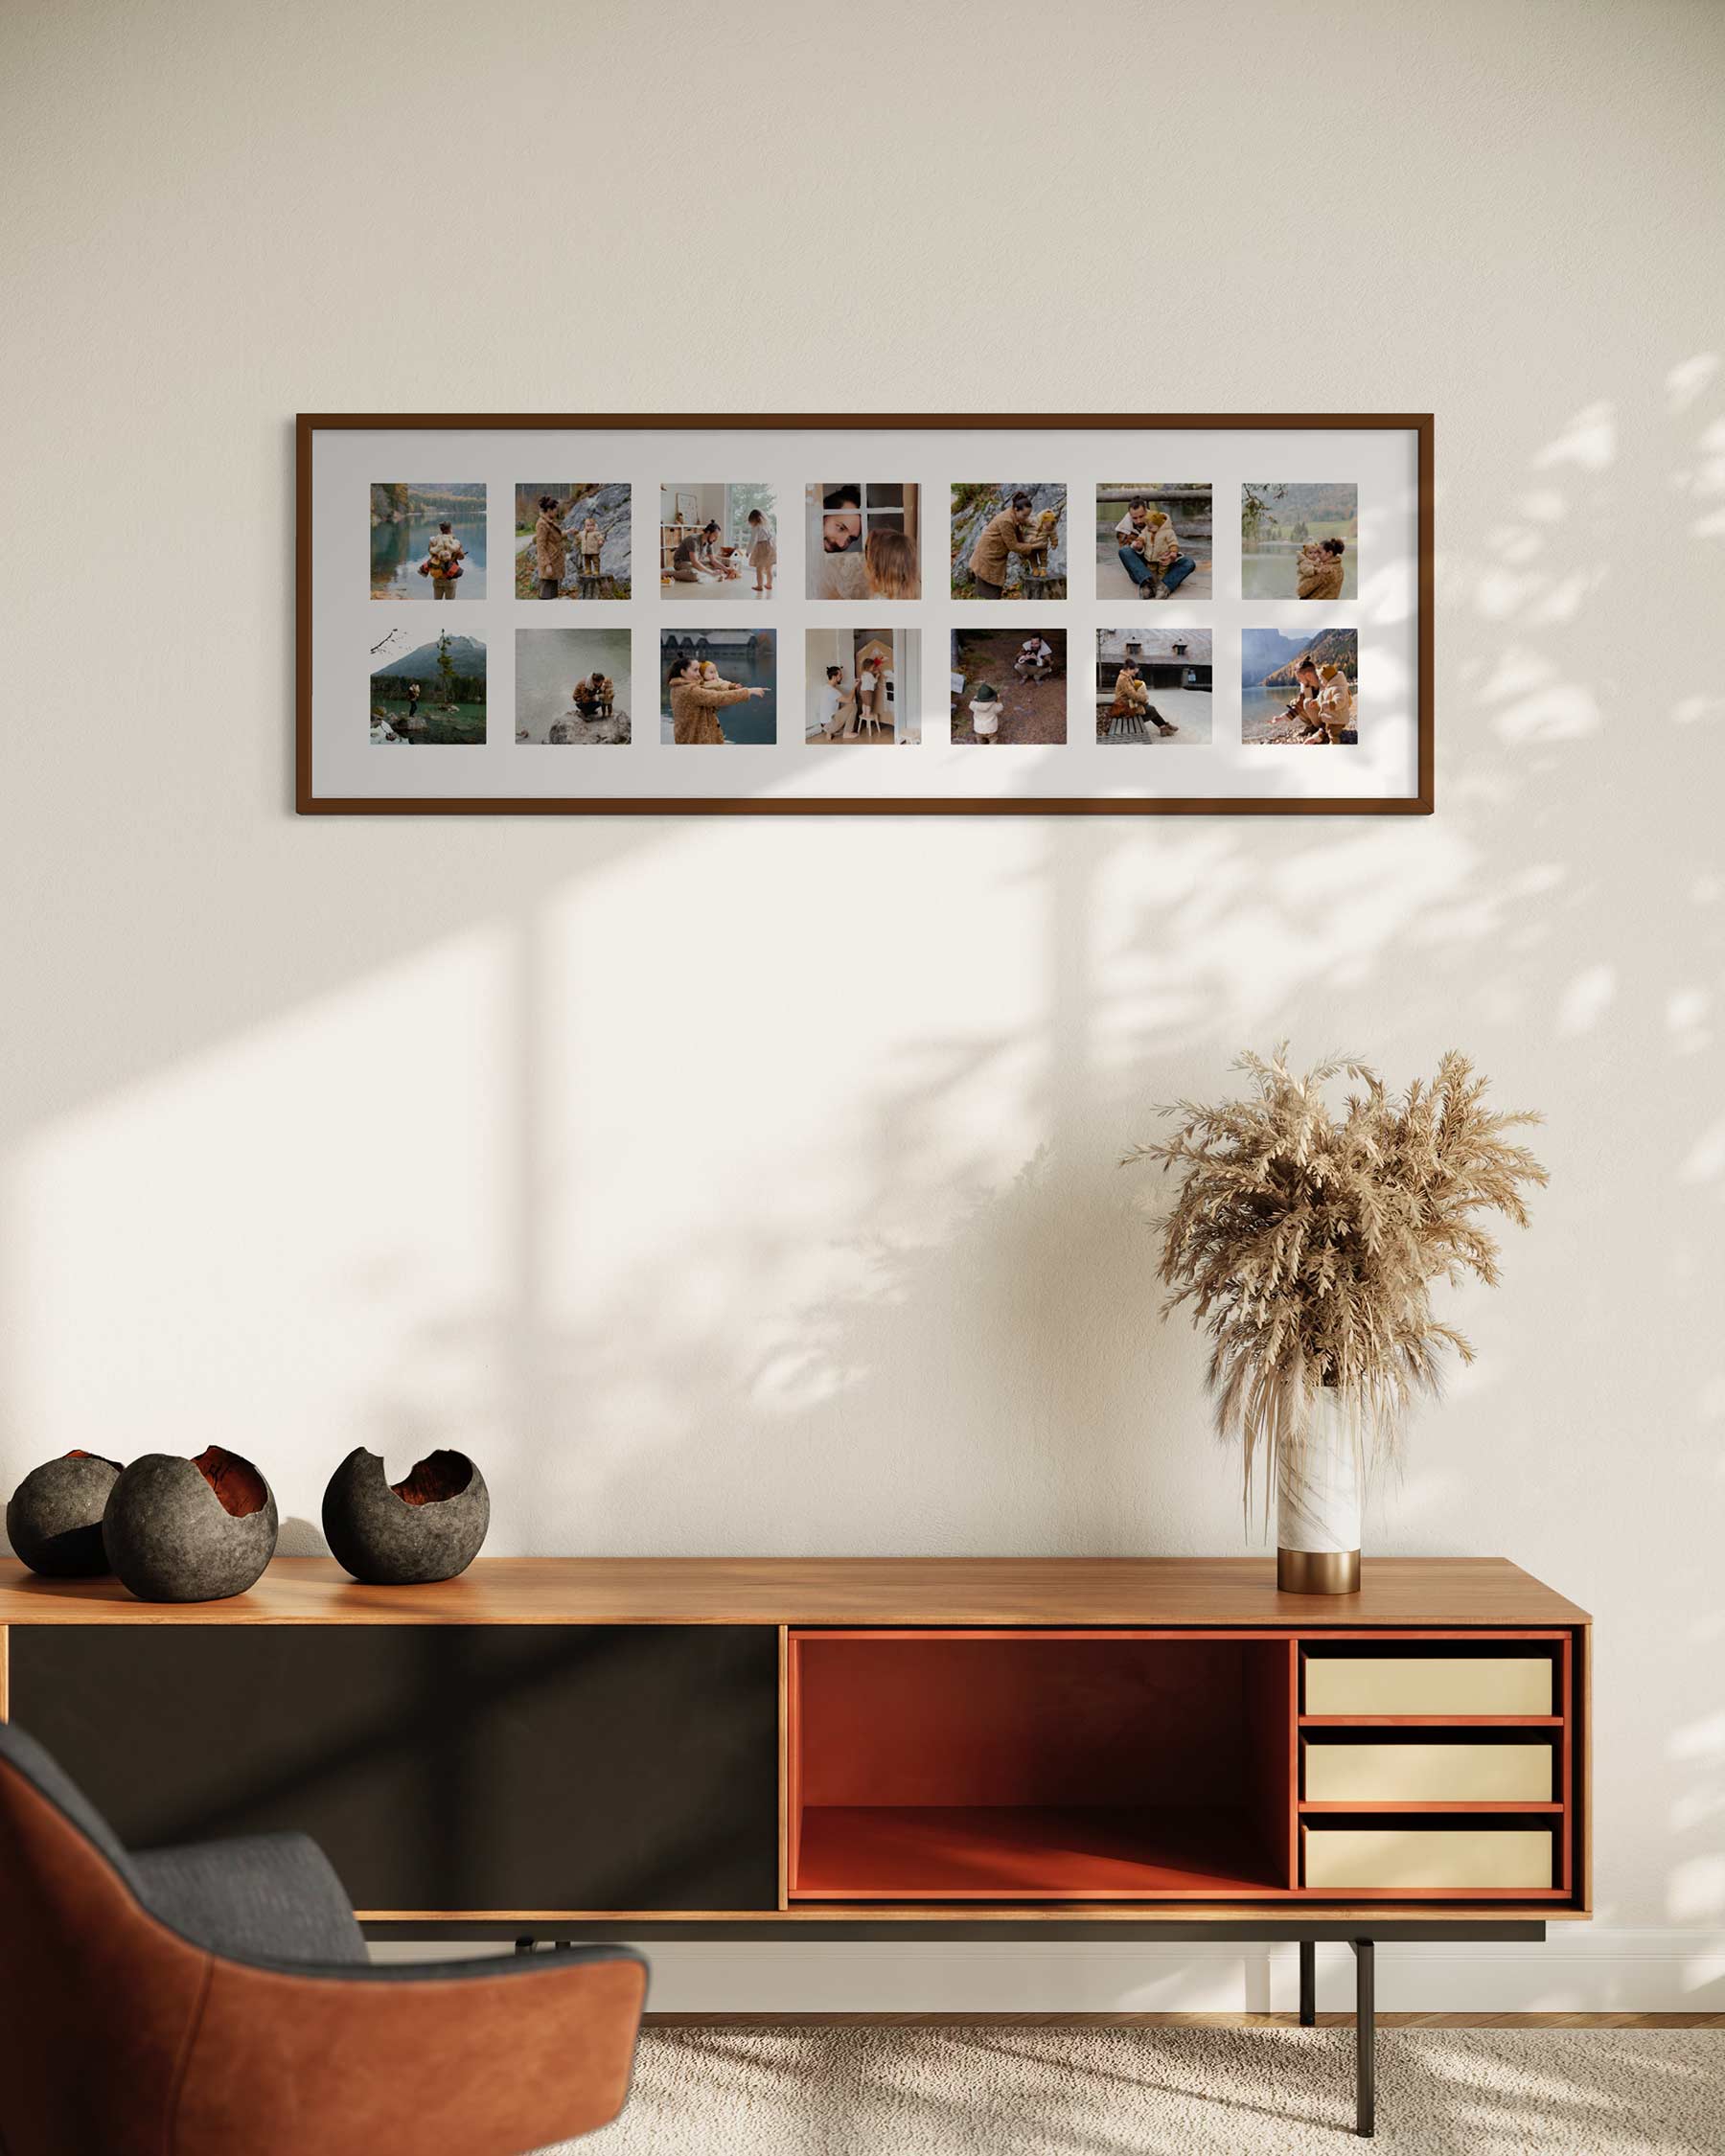 The panoramic gallery frame